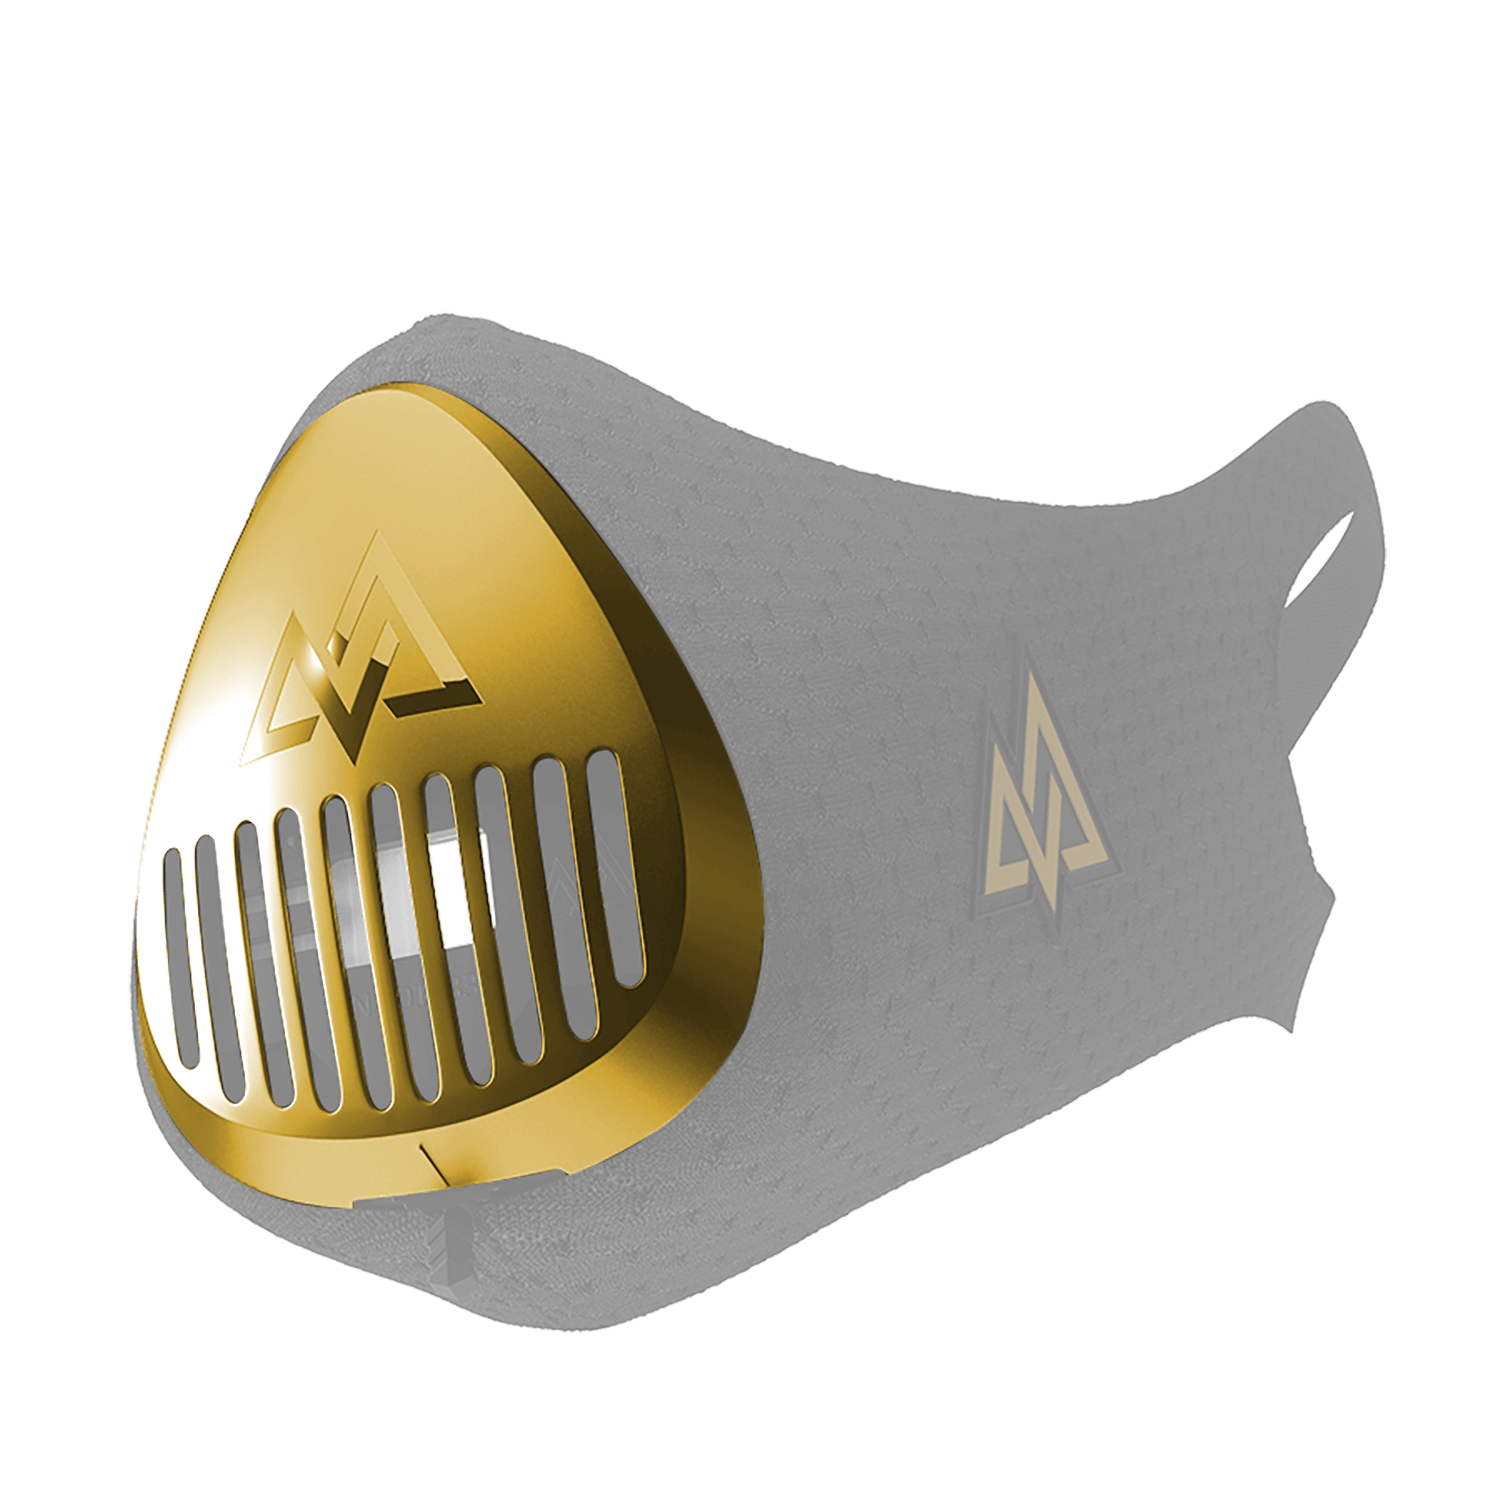 3.0 Gold Chrome Cap - Left side view on mask